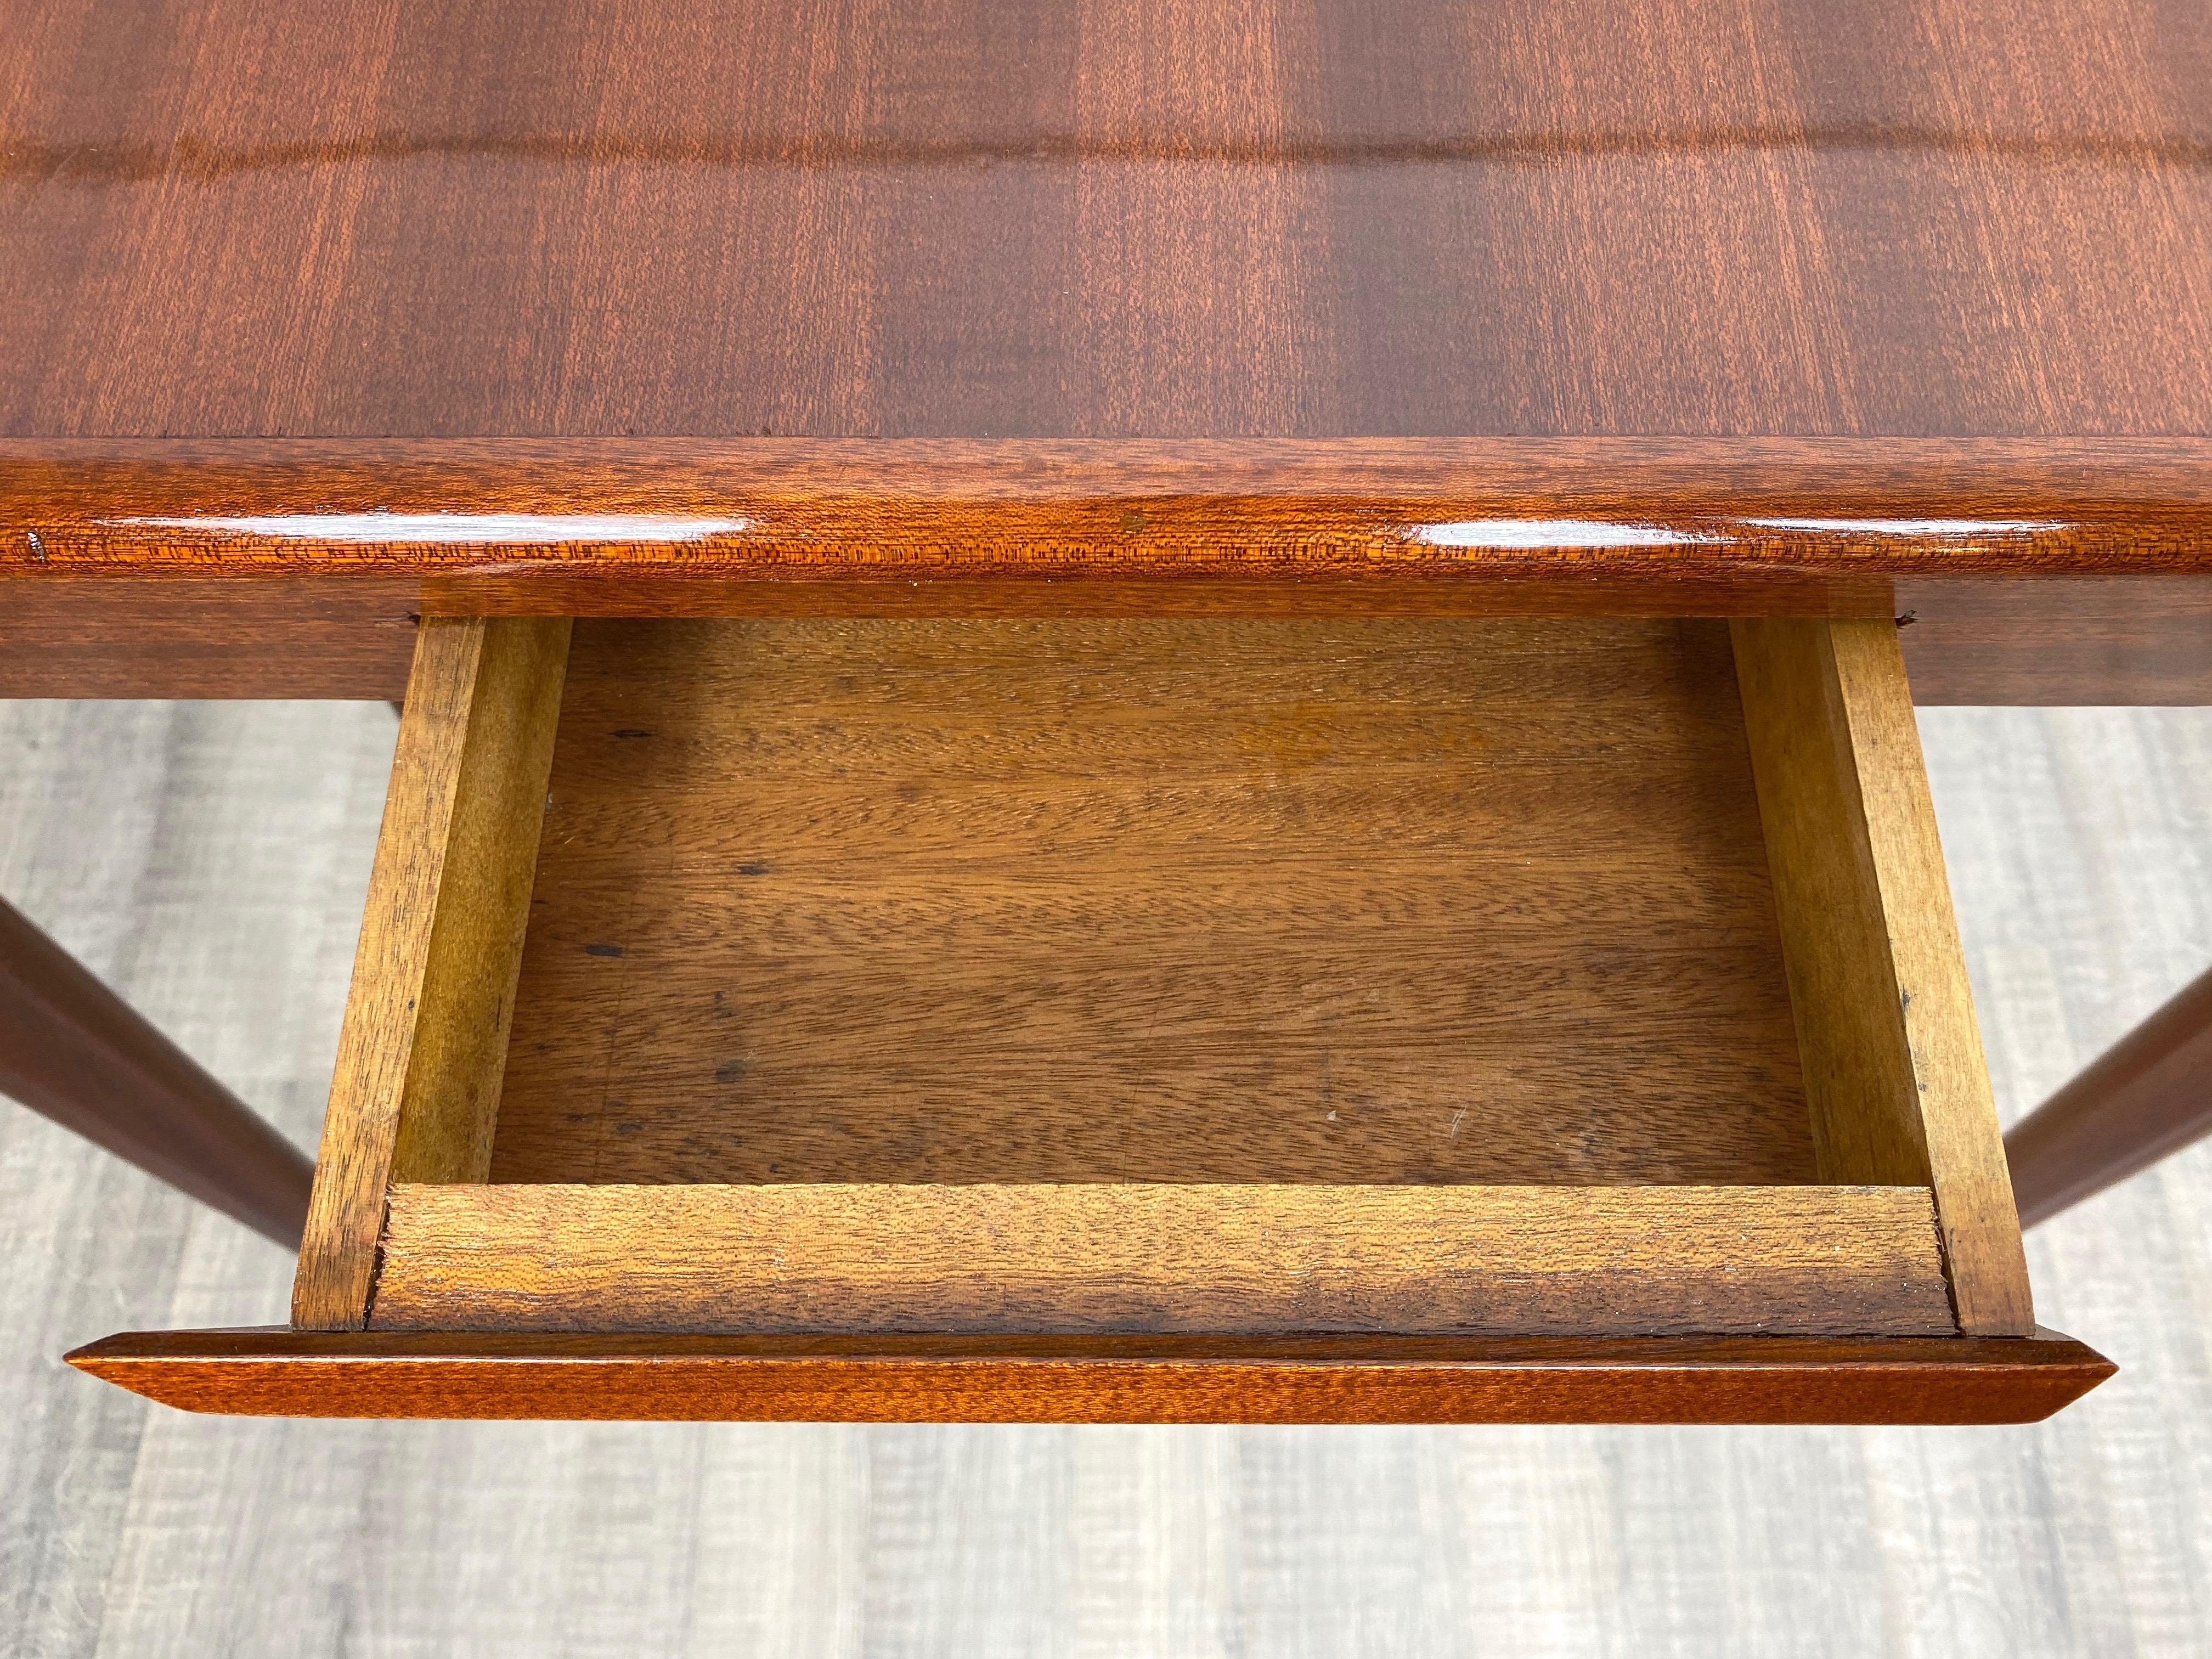 Italian Midcentury Mahogany Wood and Glass Console Table by Carlo de Carli 1950s For Sale 9